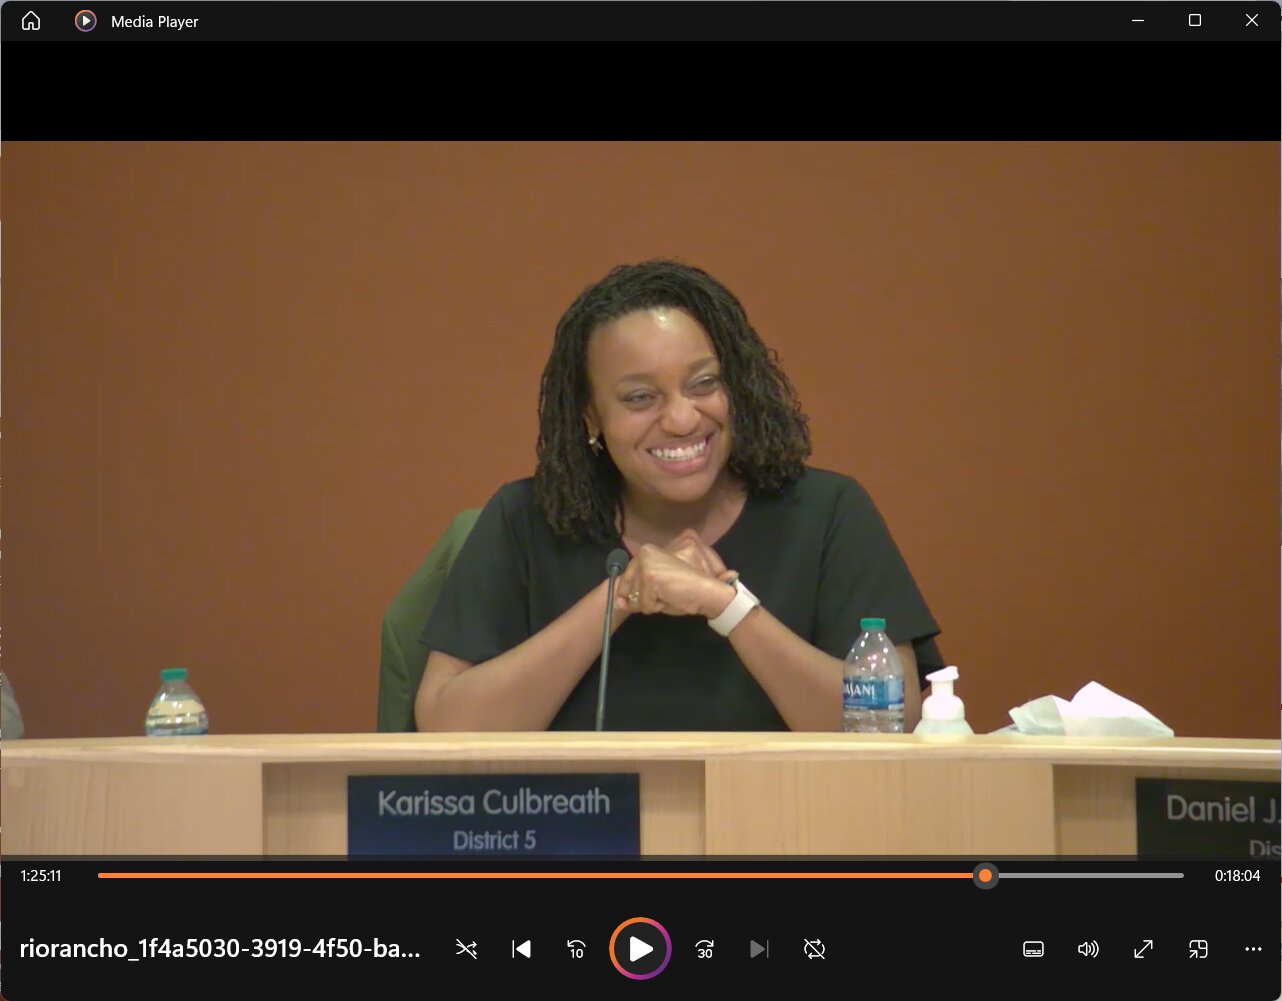 Rio Rancho City Councilor Karissa Culbreath said debating issues like book bans was the reason they have public forums.